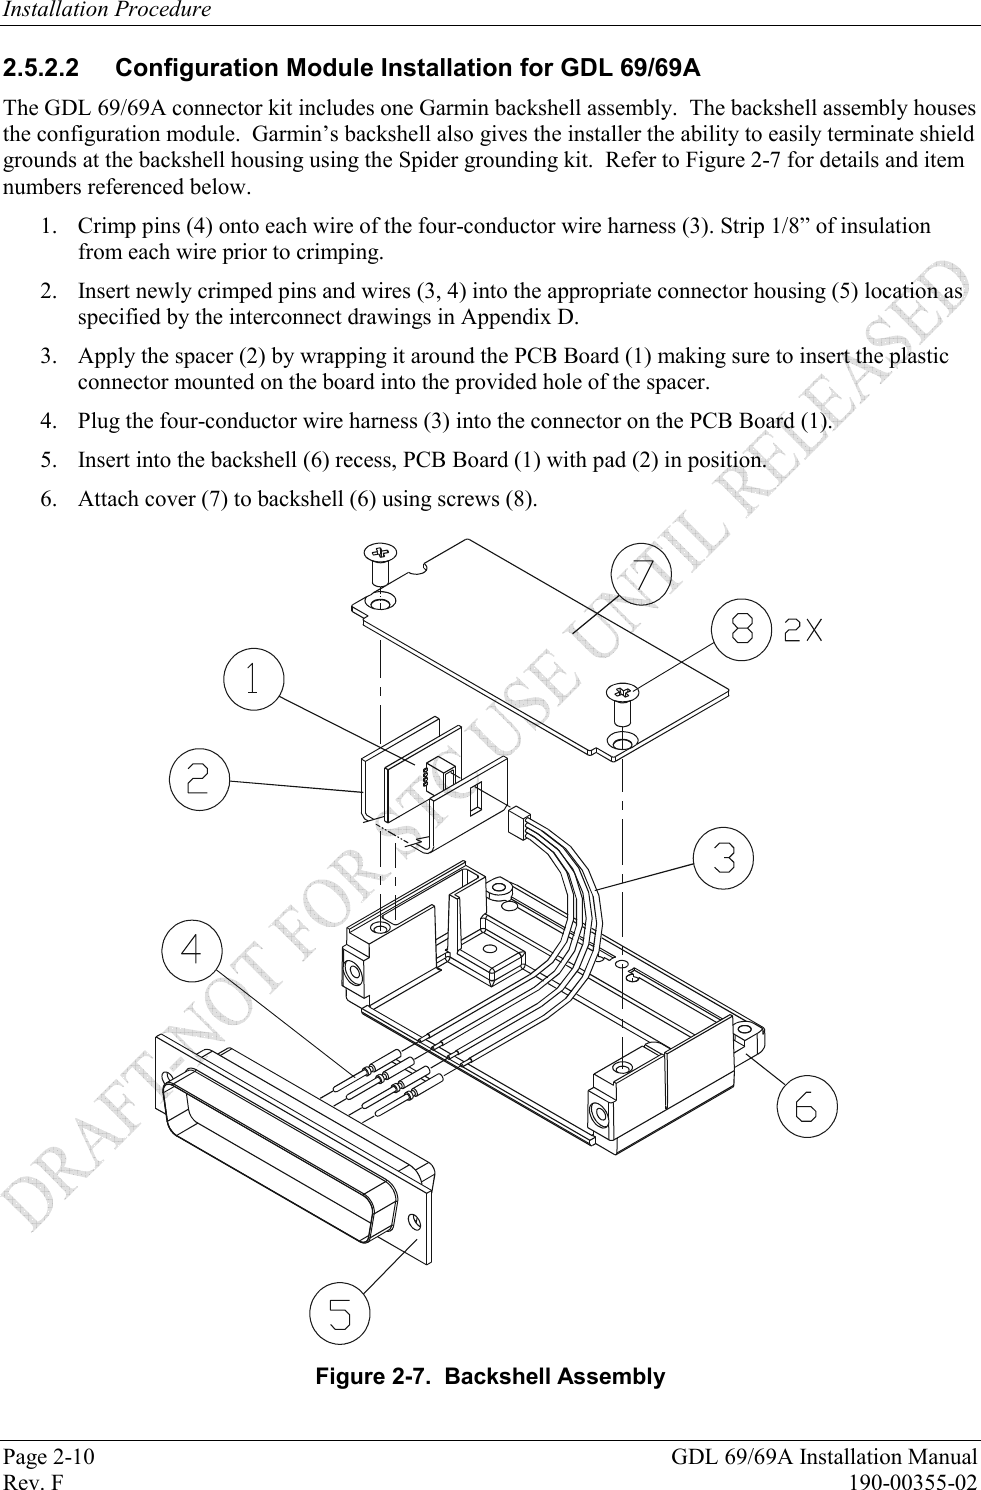 Installation Procedure Page 2-10  GDL 69/69A Installation Manual Rev. F  190-00355-02 2.5.2.2 Configuration Module Installation for GDL 69/69A The GDL 69/69A connector kit includes one Garmin backshell assembly.  The backshell assembly houses the configuration module.  Garmin’s backshell also gives the installer the ability to easily terminate shield grounds at the backshell housing using the Spider grounding kit.  Refer to Figure 2-7 for details and item numbers referenced below. 1. Crimp pins (4) onto each wire of the four-conductor wire harness (3). Strip 1/8” of insulation from each wire prior to crimping.  2. Insert newly crimped pins and wires (3, 4) into the appropriate connector housing (5) location as specified by the interconnect drawings in Appendix D.  3. Apply the spacer (2) by wrapping it around the PCB Board (1) making sure to insert the plastic connector mounted on the board into the provided hole of the spacer.  4. Plug the four-conductor wire harness (3) into the connector on the PCB Board (1).  5. Insert into the backshell (6) recess, PCB Board (1) with pad (2) in position.  6. Attach cover (7) to backshell (6) using screws (8).   Figure 2-7.  Backshell Assembly 